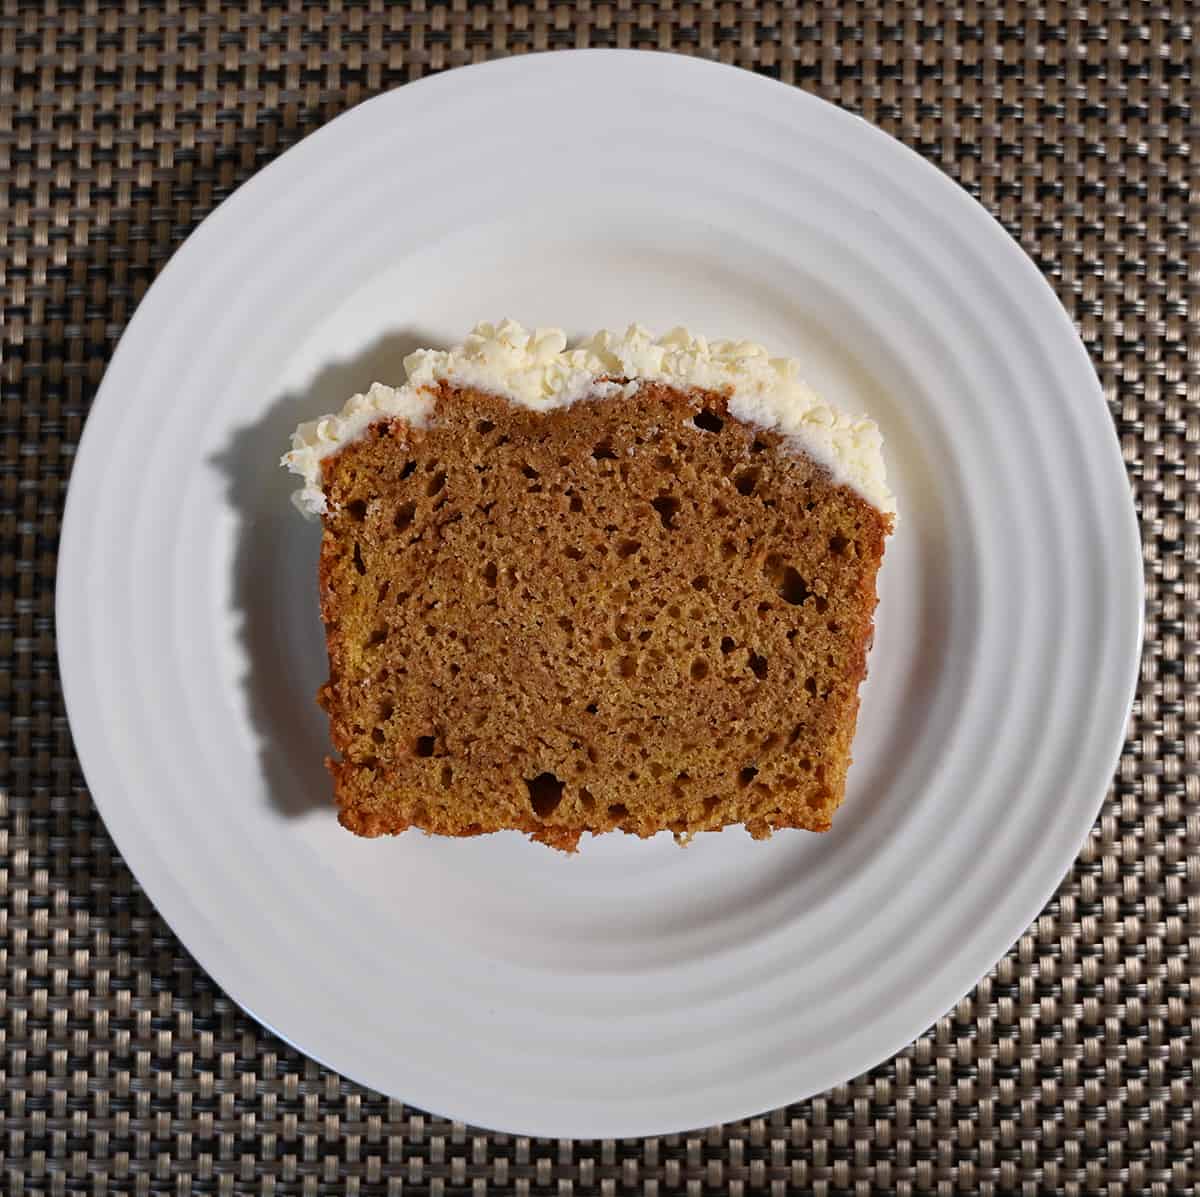 Top down image of one slice of pumpkin spice loaf served on a white plate. The slice is laying on its side so you can see how fluffy and moist it looks.